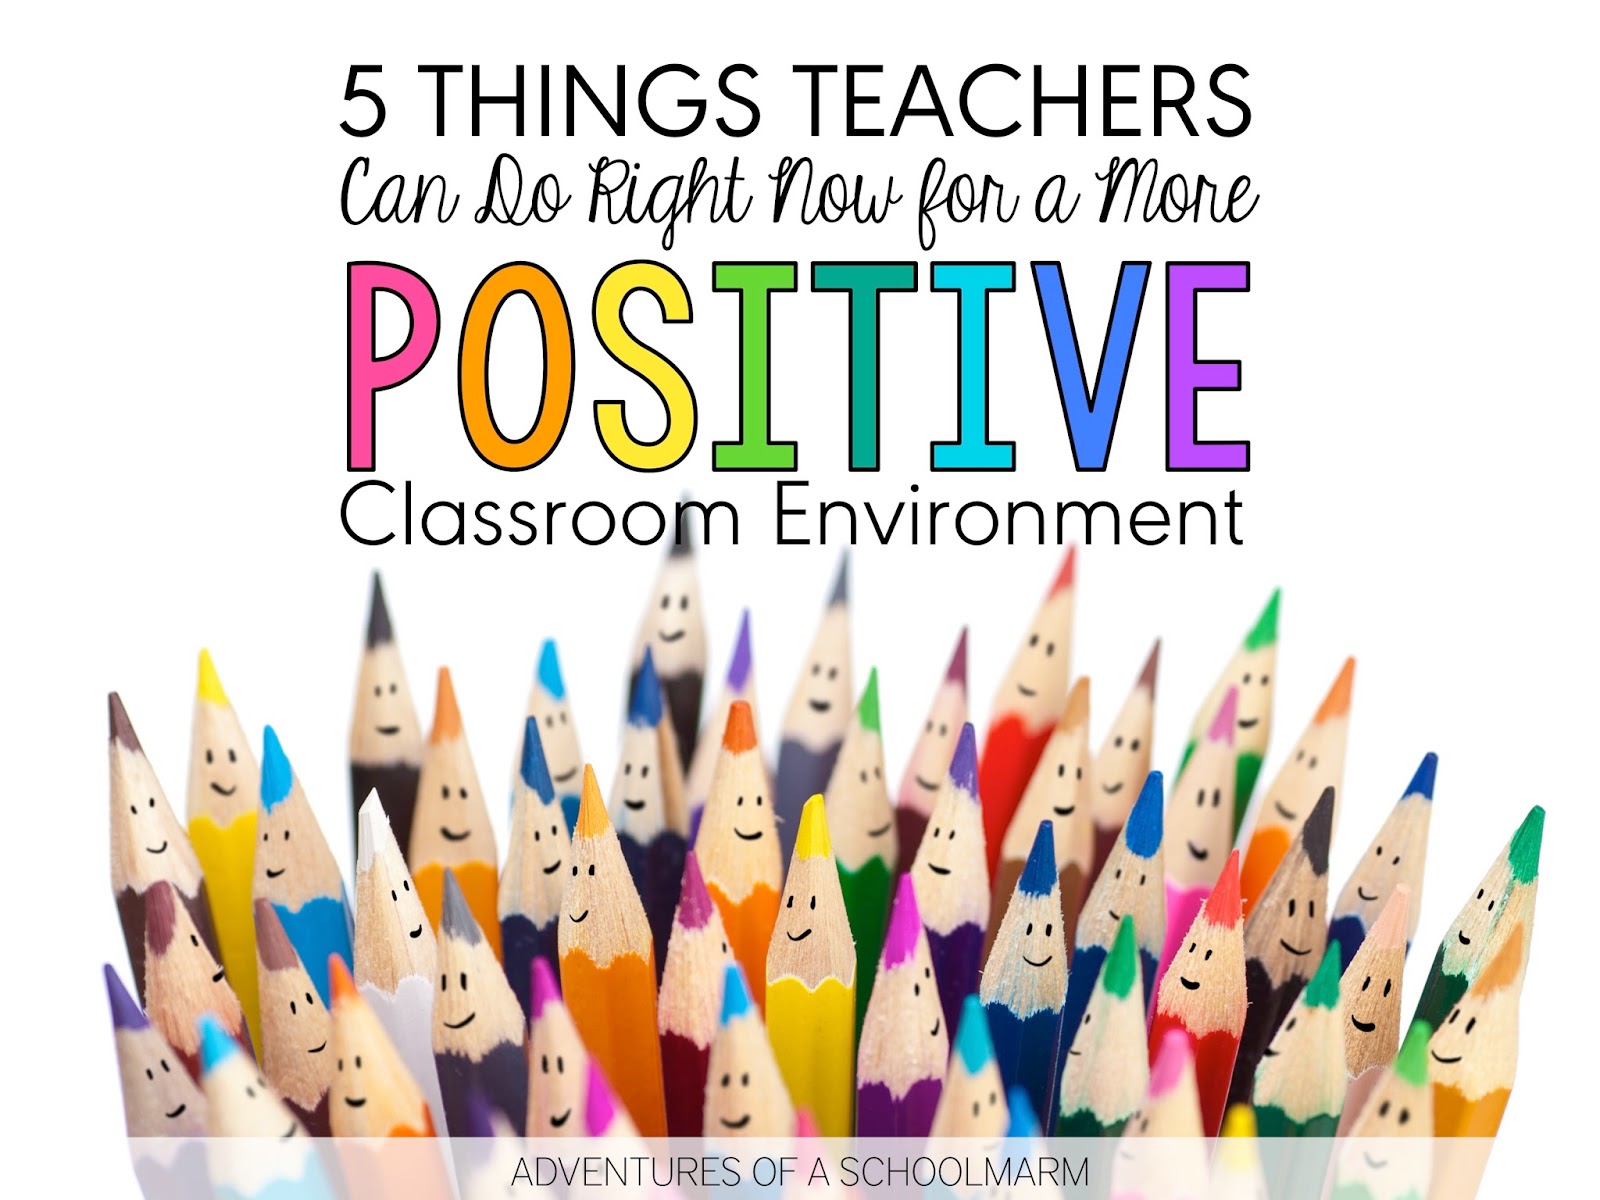 5 Things You Can Do Right Now for a More Positive Classroom